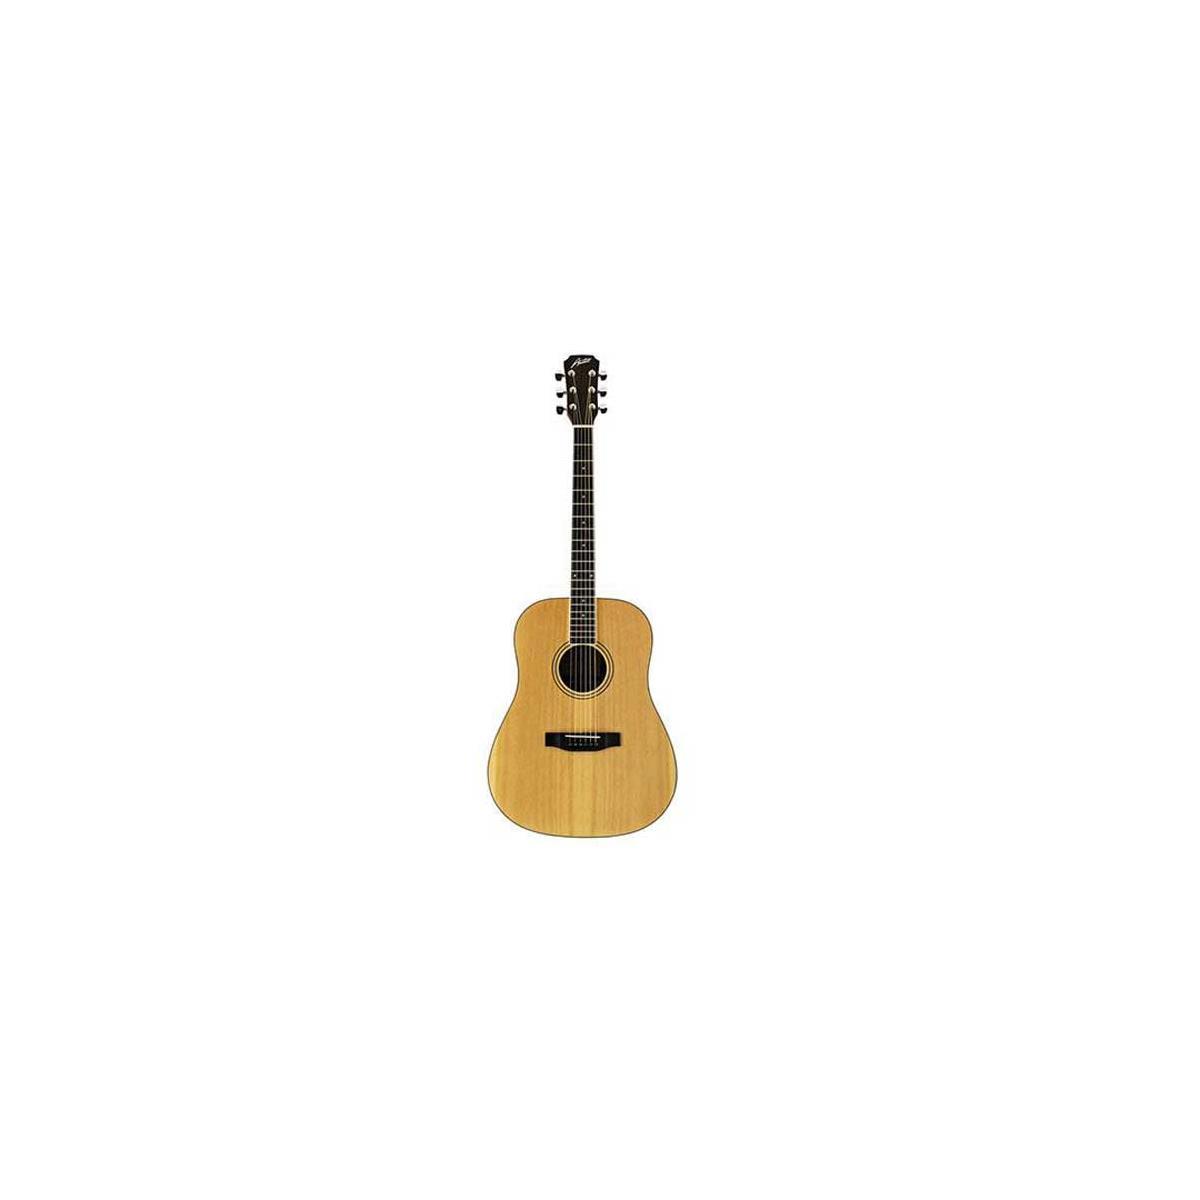 Image of Austin AA25 Series Dreadnought Acoustic Guitar